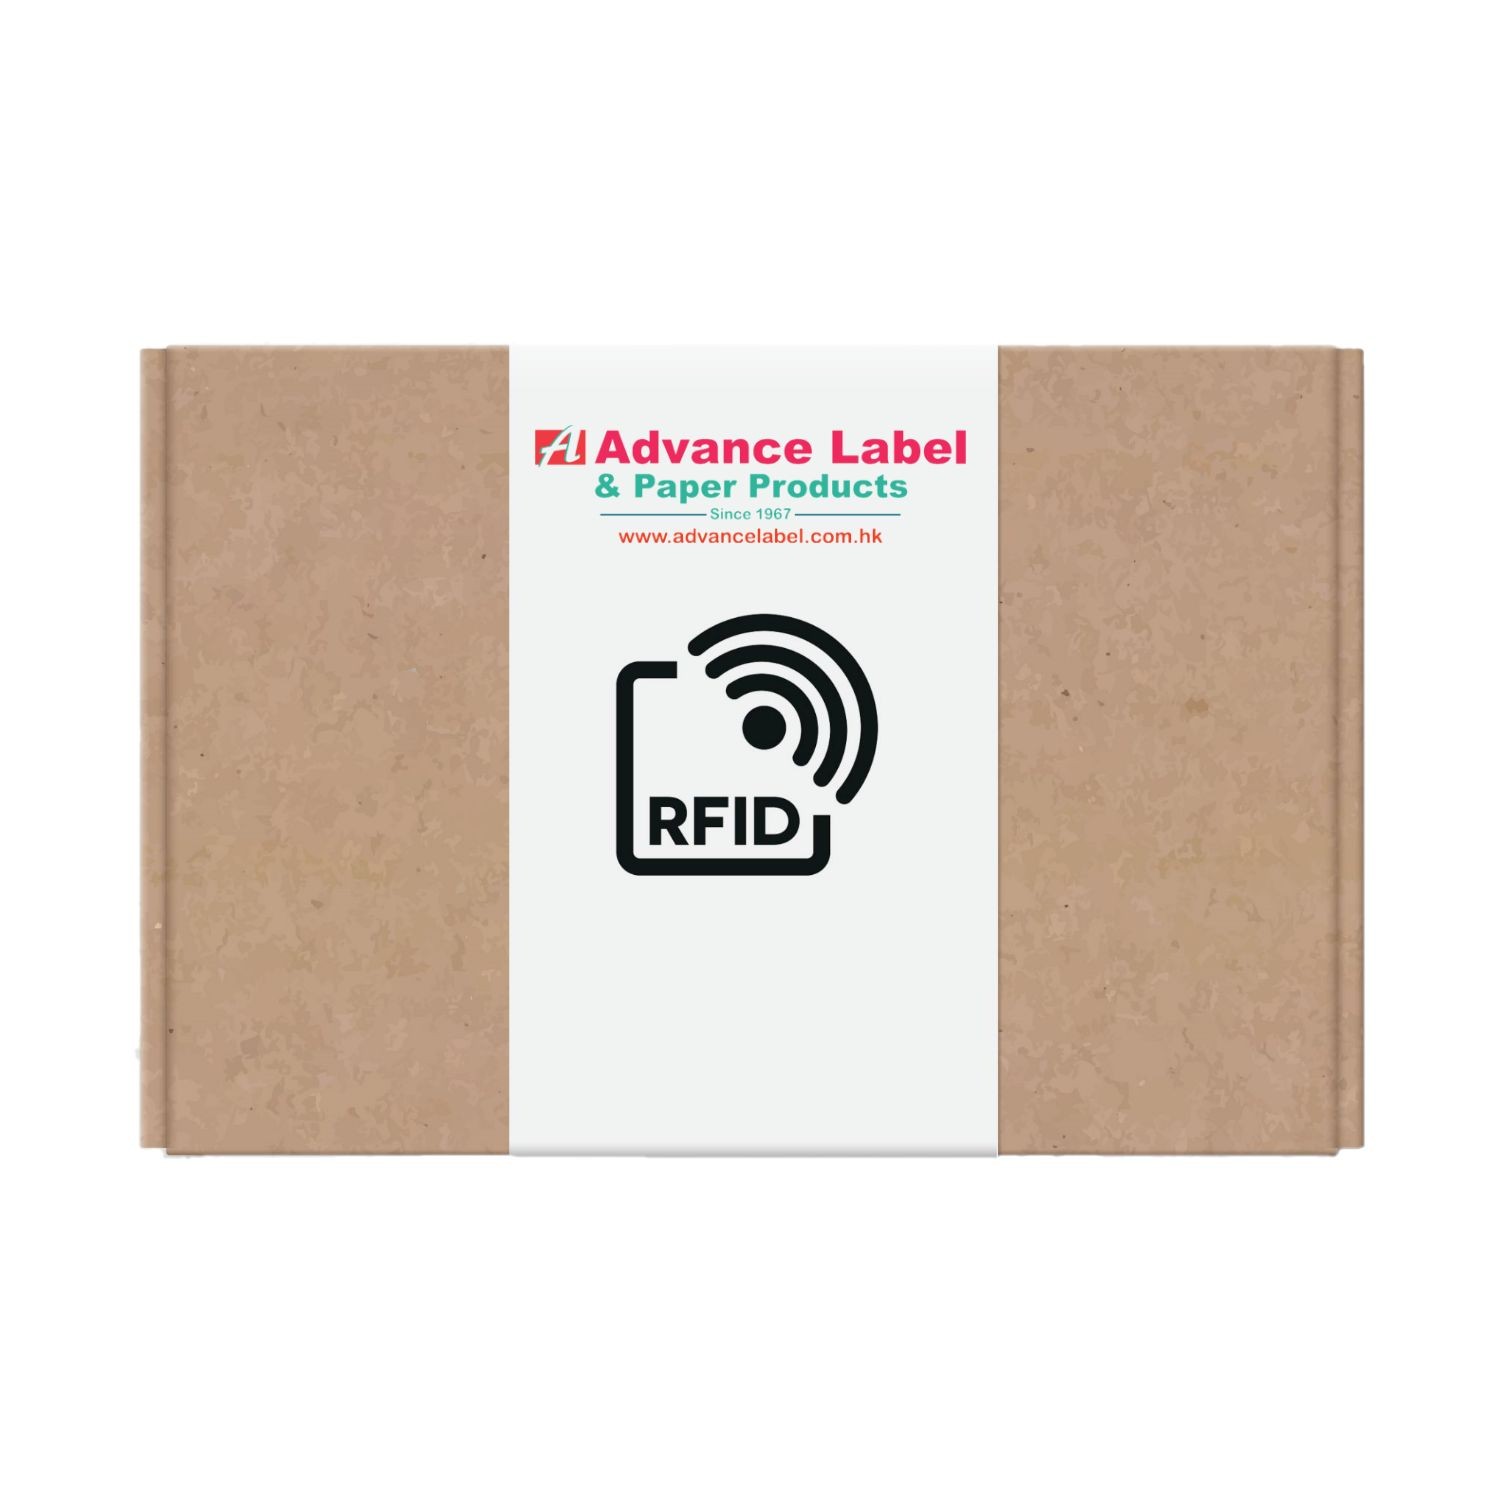 RFID Label and Packaging Box from Advance Label Limited